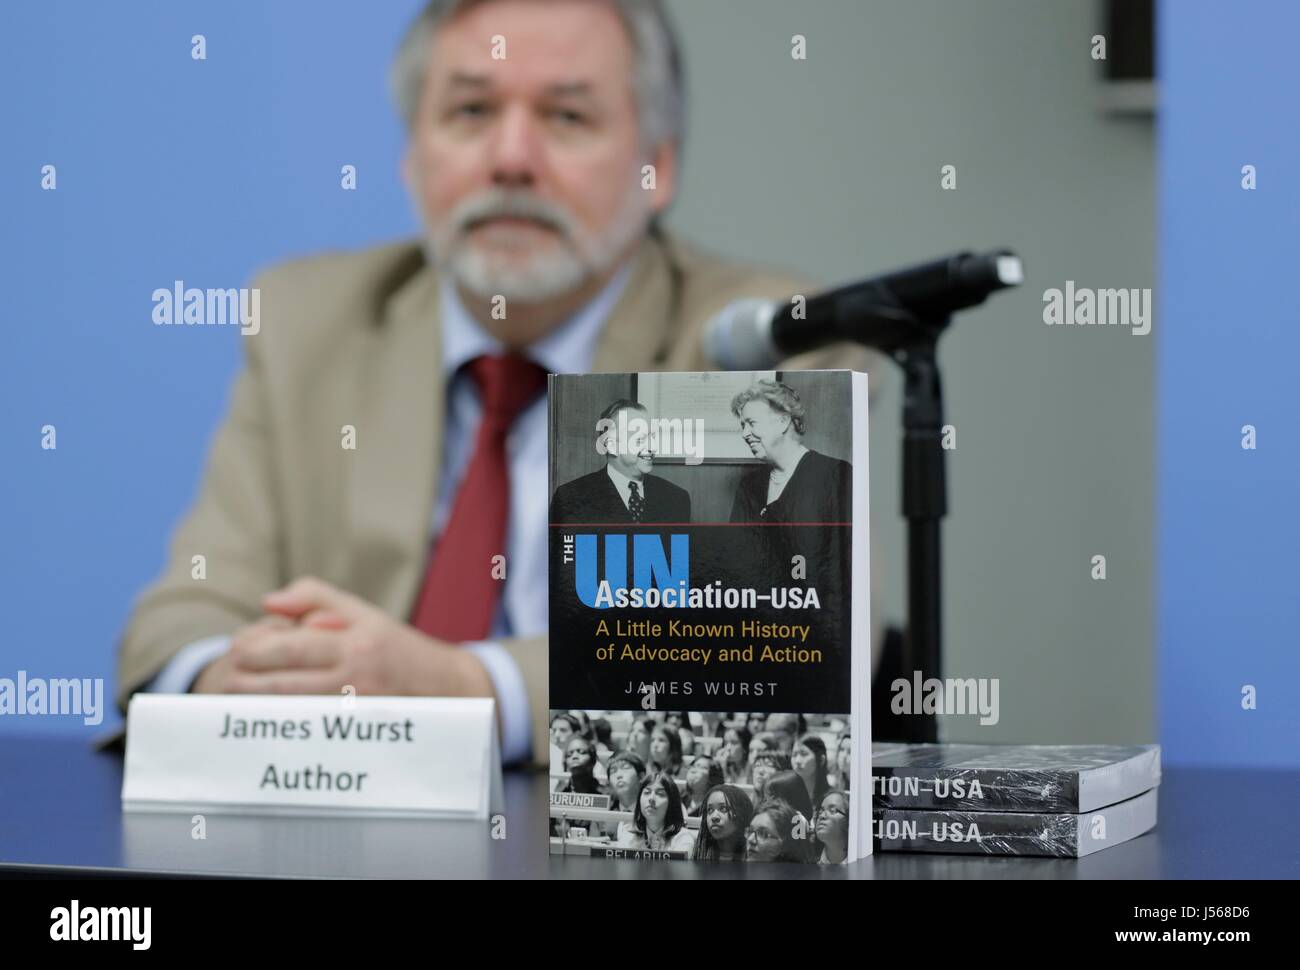 United Nations, New York, USA. 16th May, 2017. Book introduction by James Wurst 'The UN Association-USA: A Little Known History of Advocacy and Action' today at the UN Headquarters in New York. Credit: dpa picture alliance/Alamy Live News Stock Photo